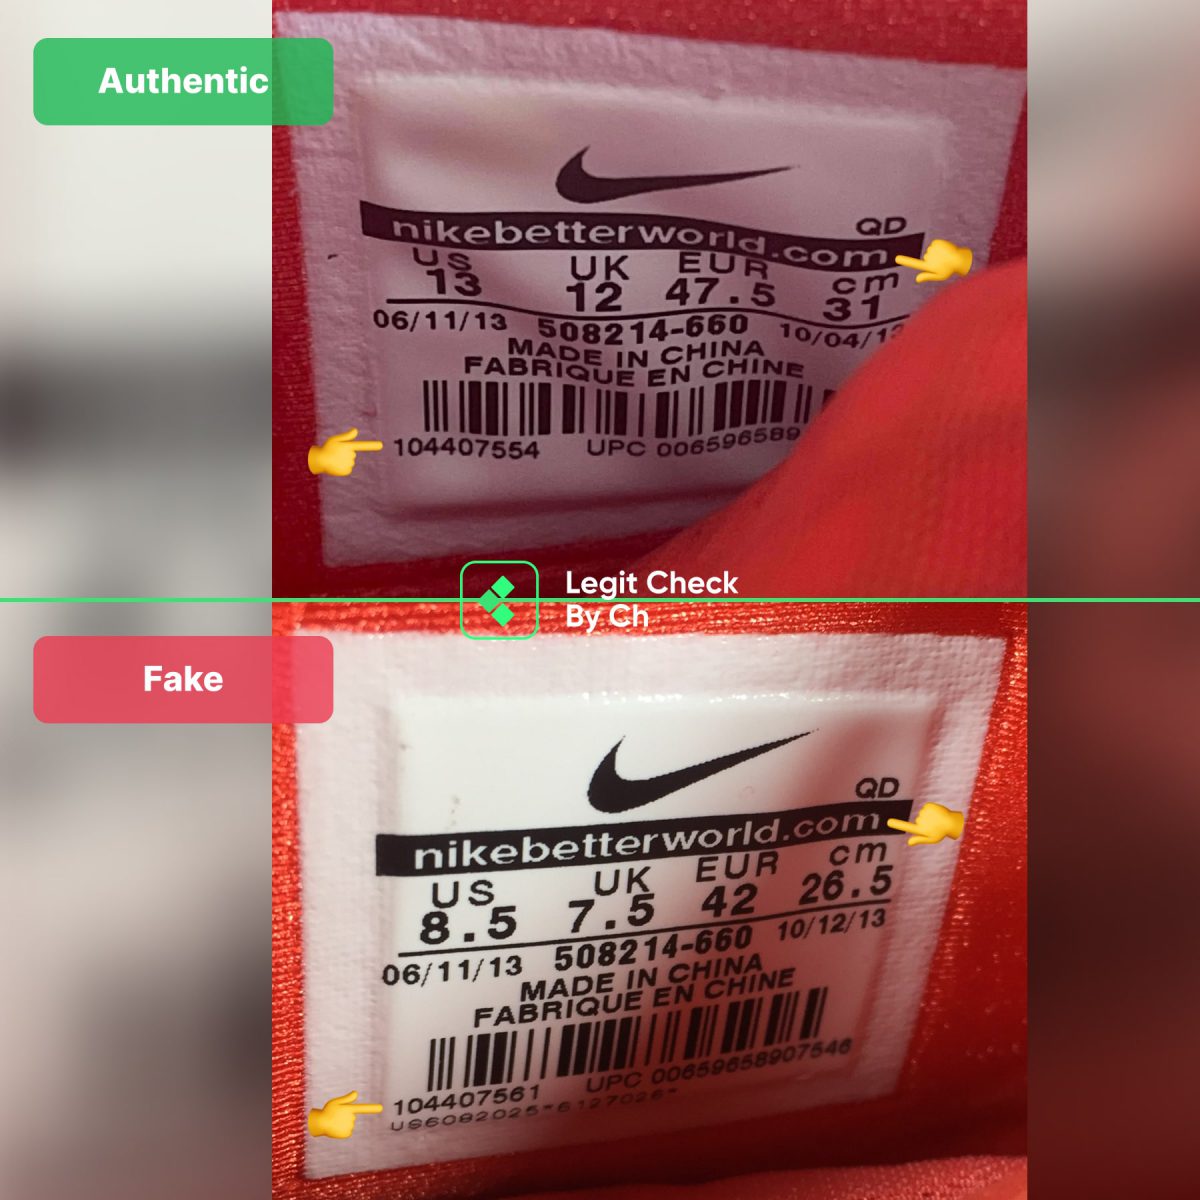 Authentic vs fake Yeezy Red October Comparison: Size Tags